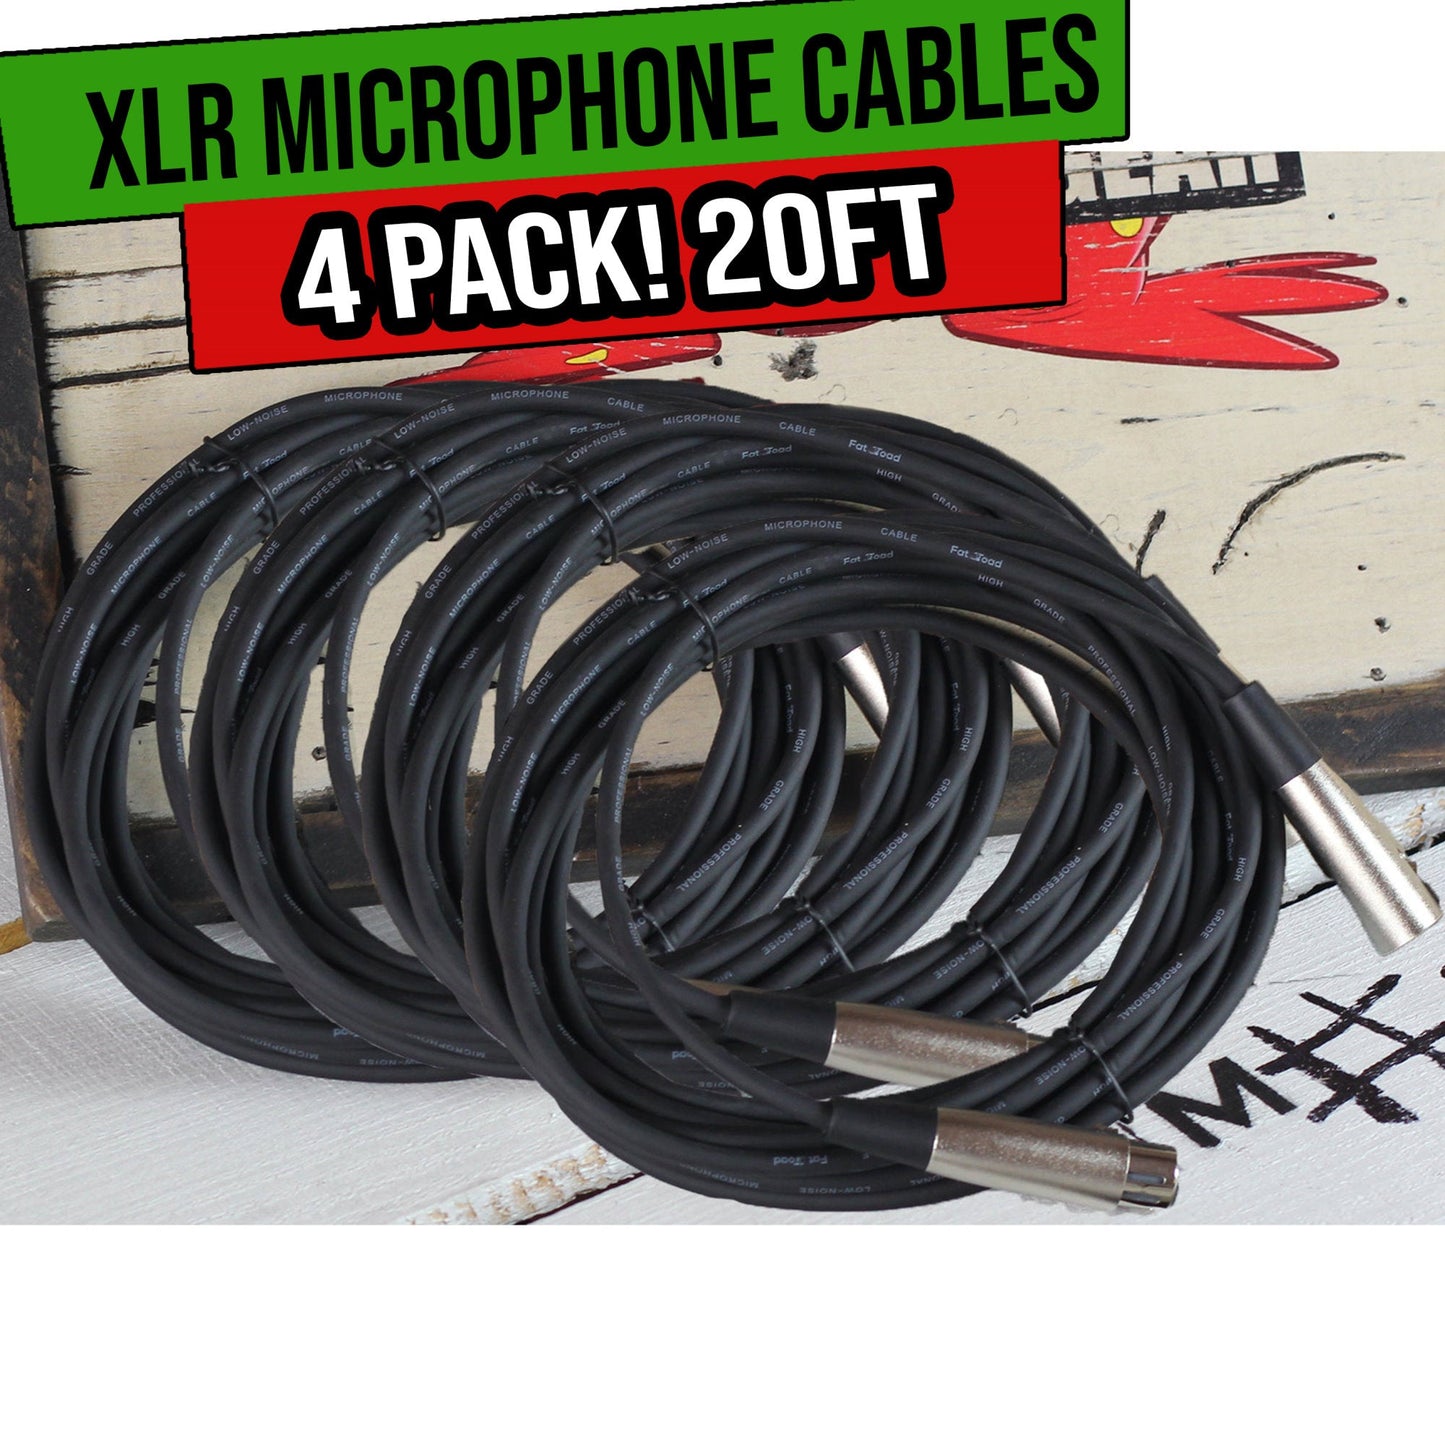 Microphone Cables by FAT TOAD - (4 Pack) 20ft Pro Audio XLR Mic Cord Patch Extension Wires